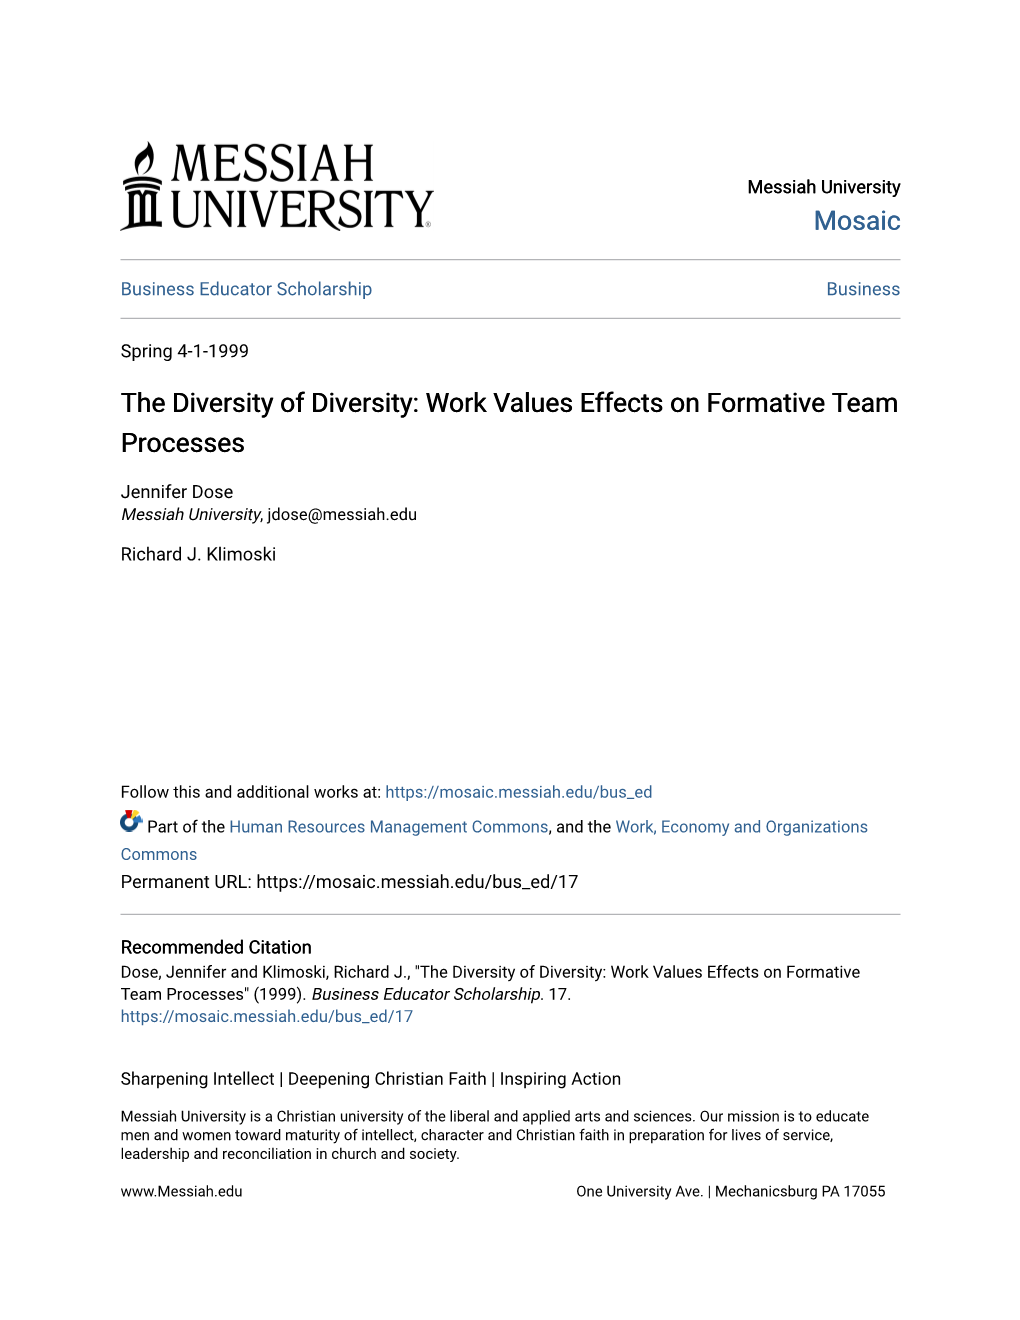 Work Values Effects on Formative Team Processes